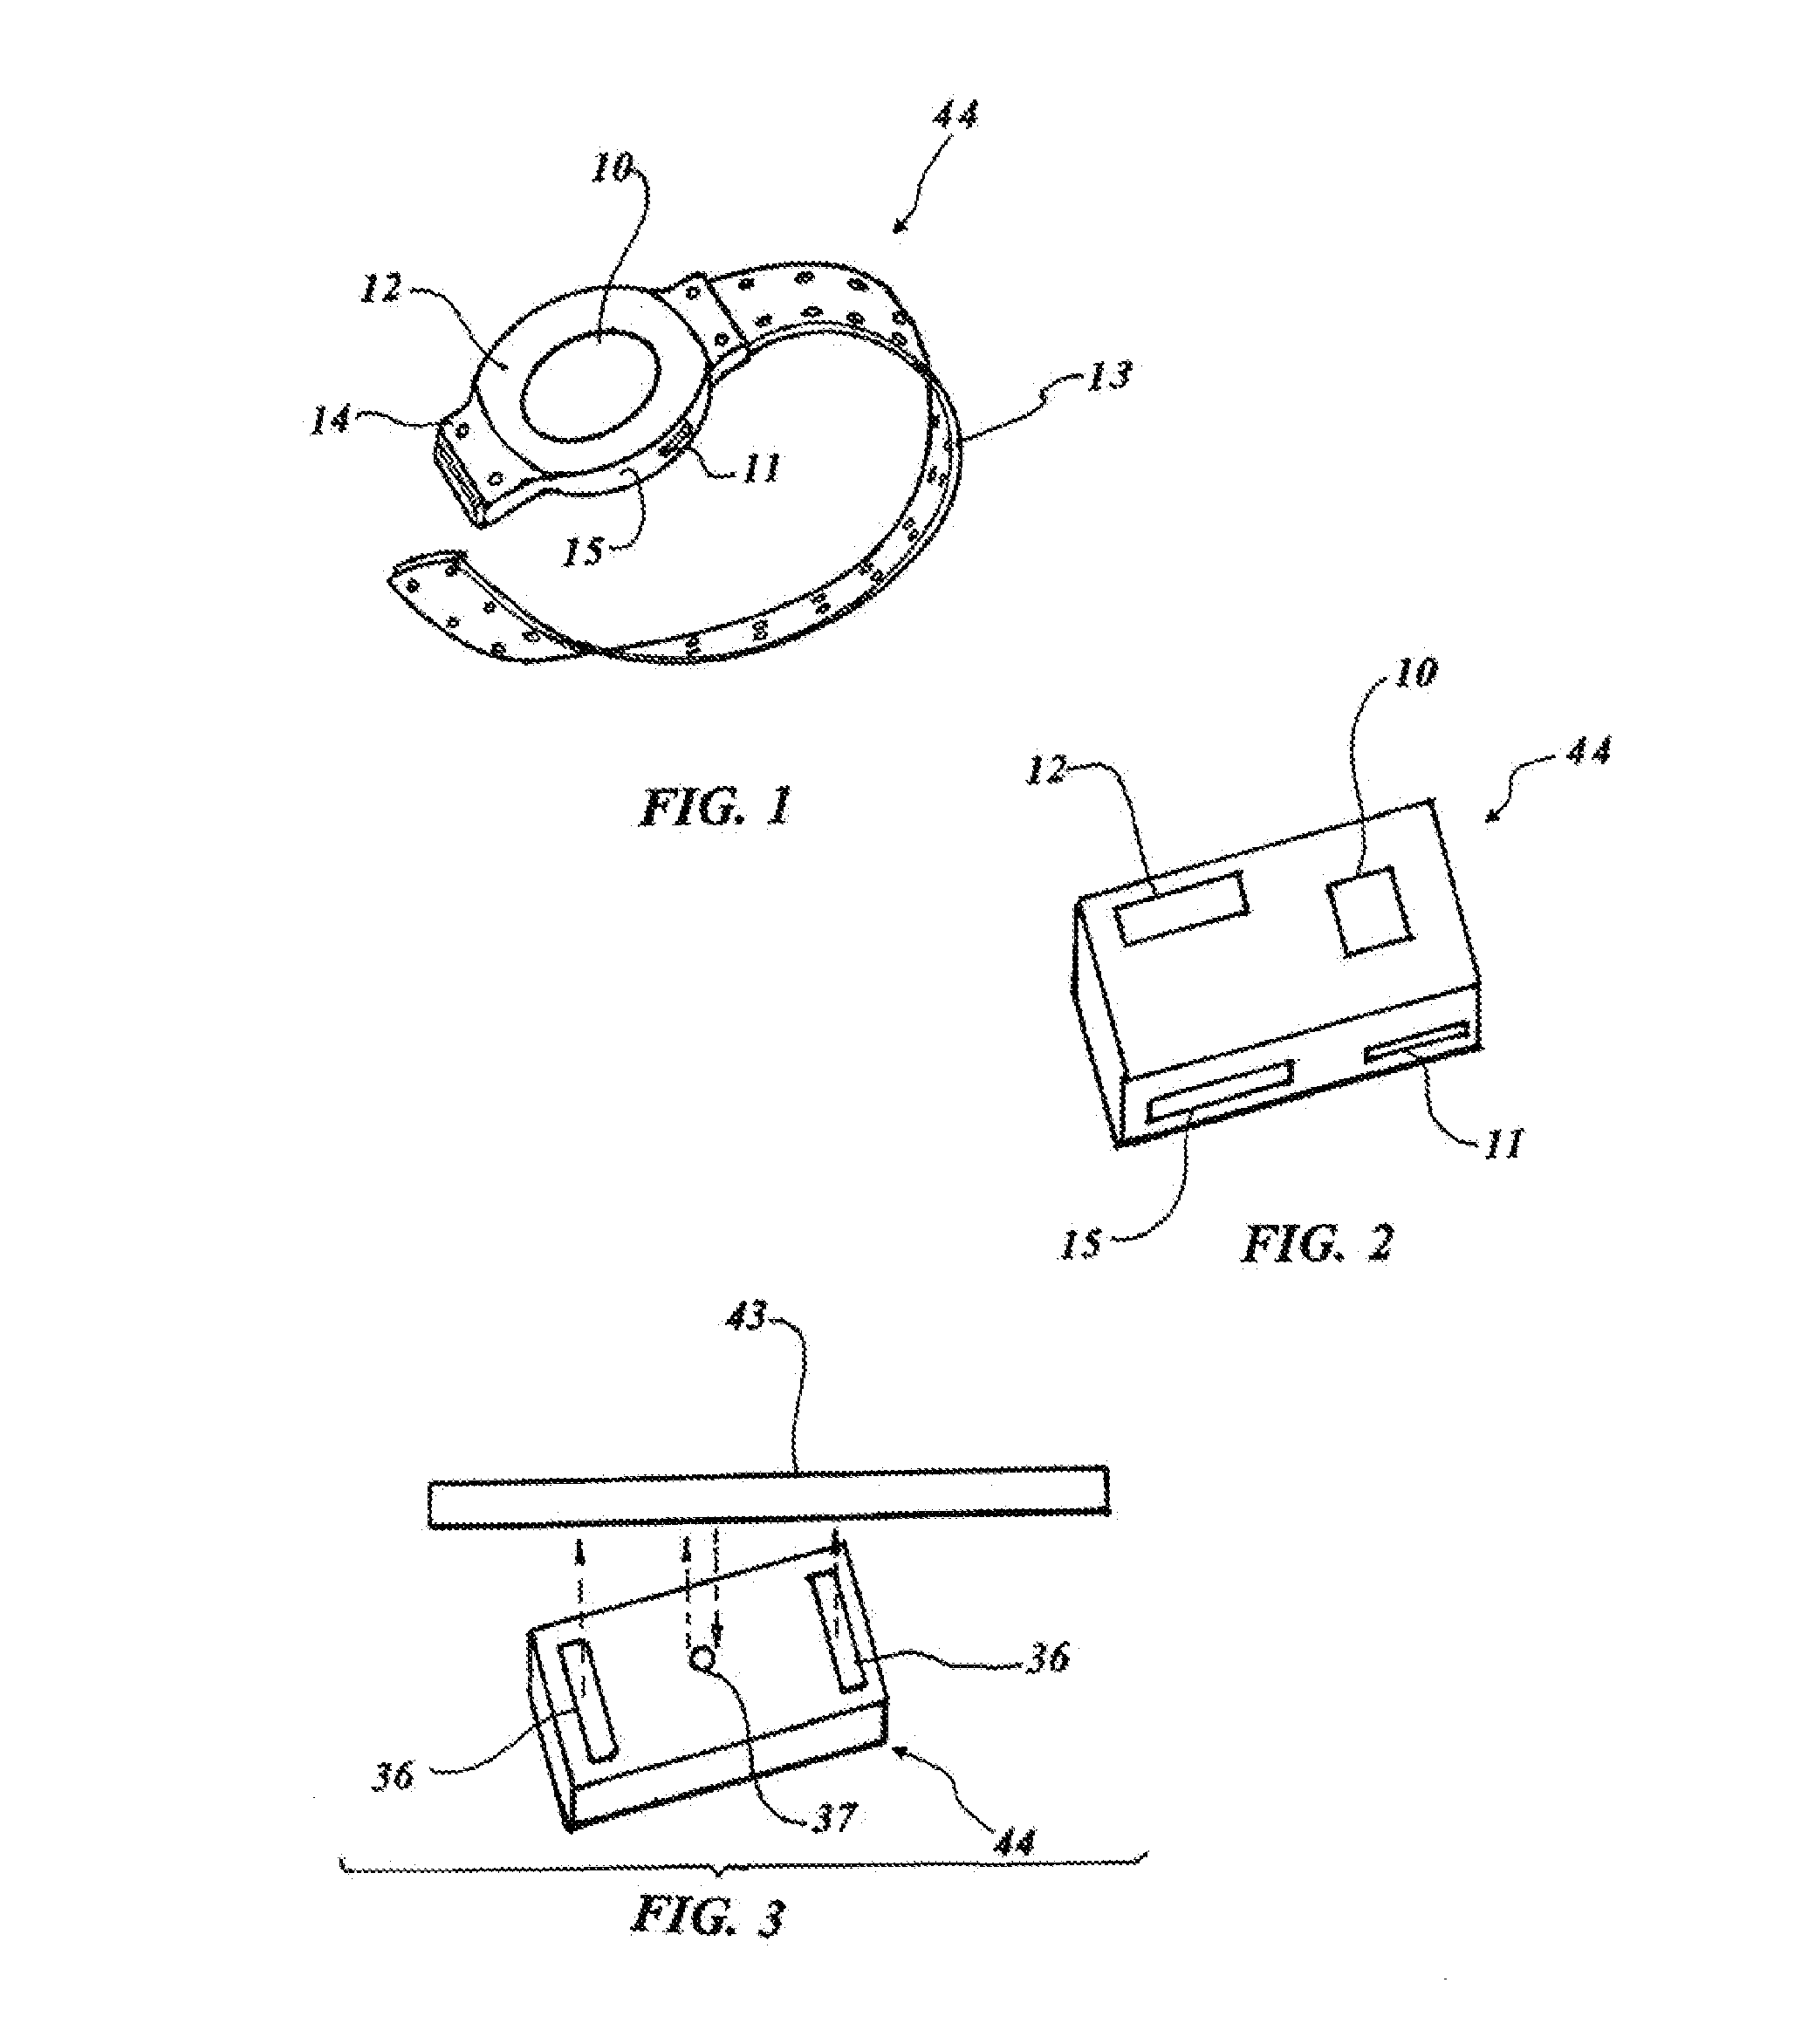 Automatic GPS tracking system with passive or active battery circuitry